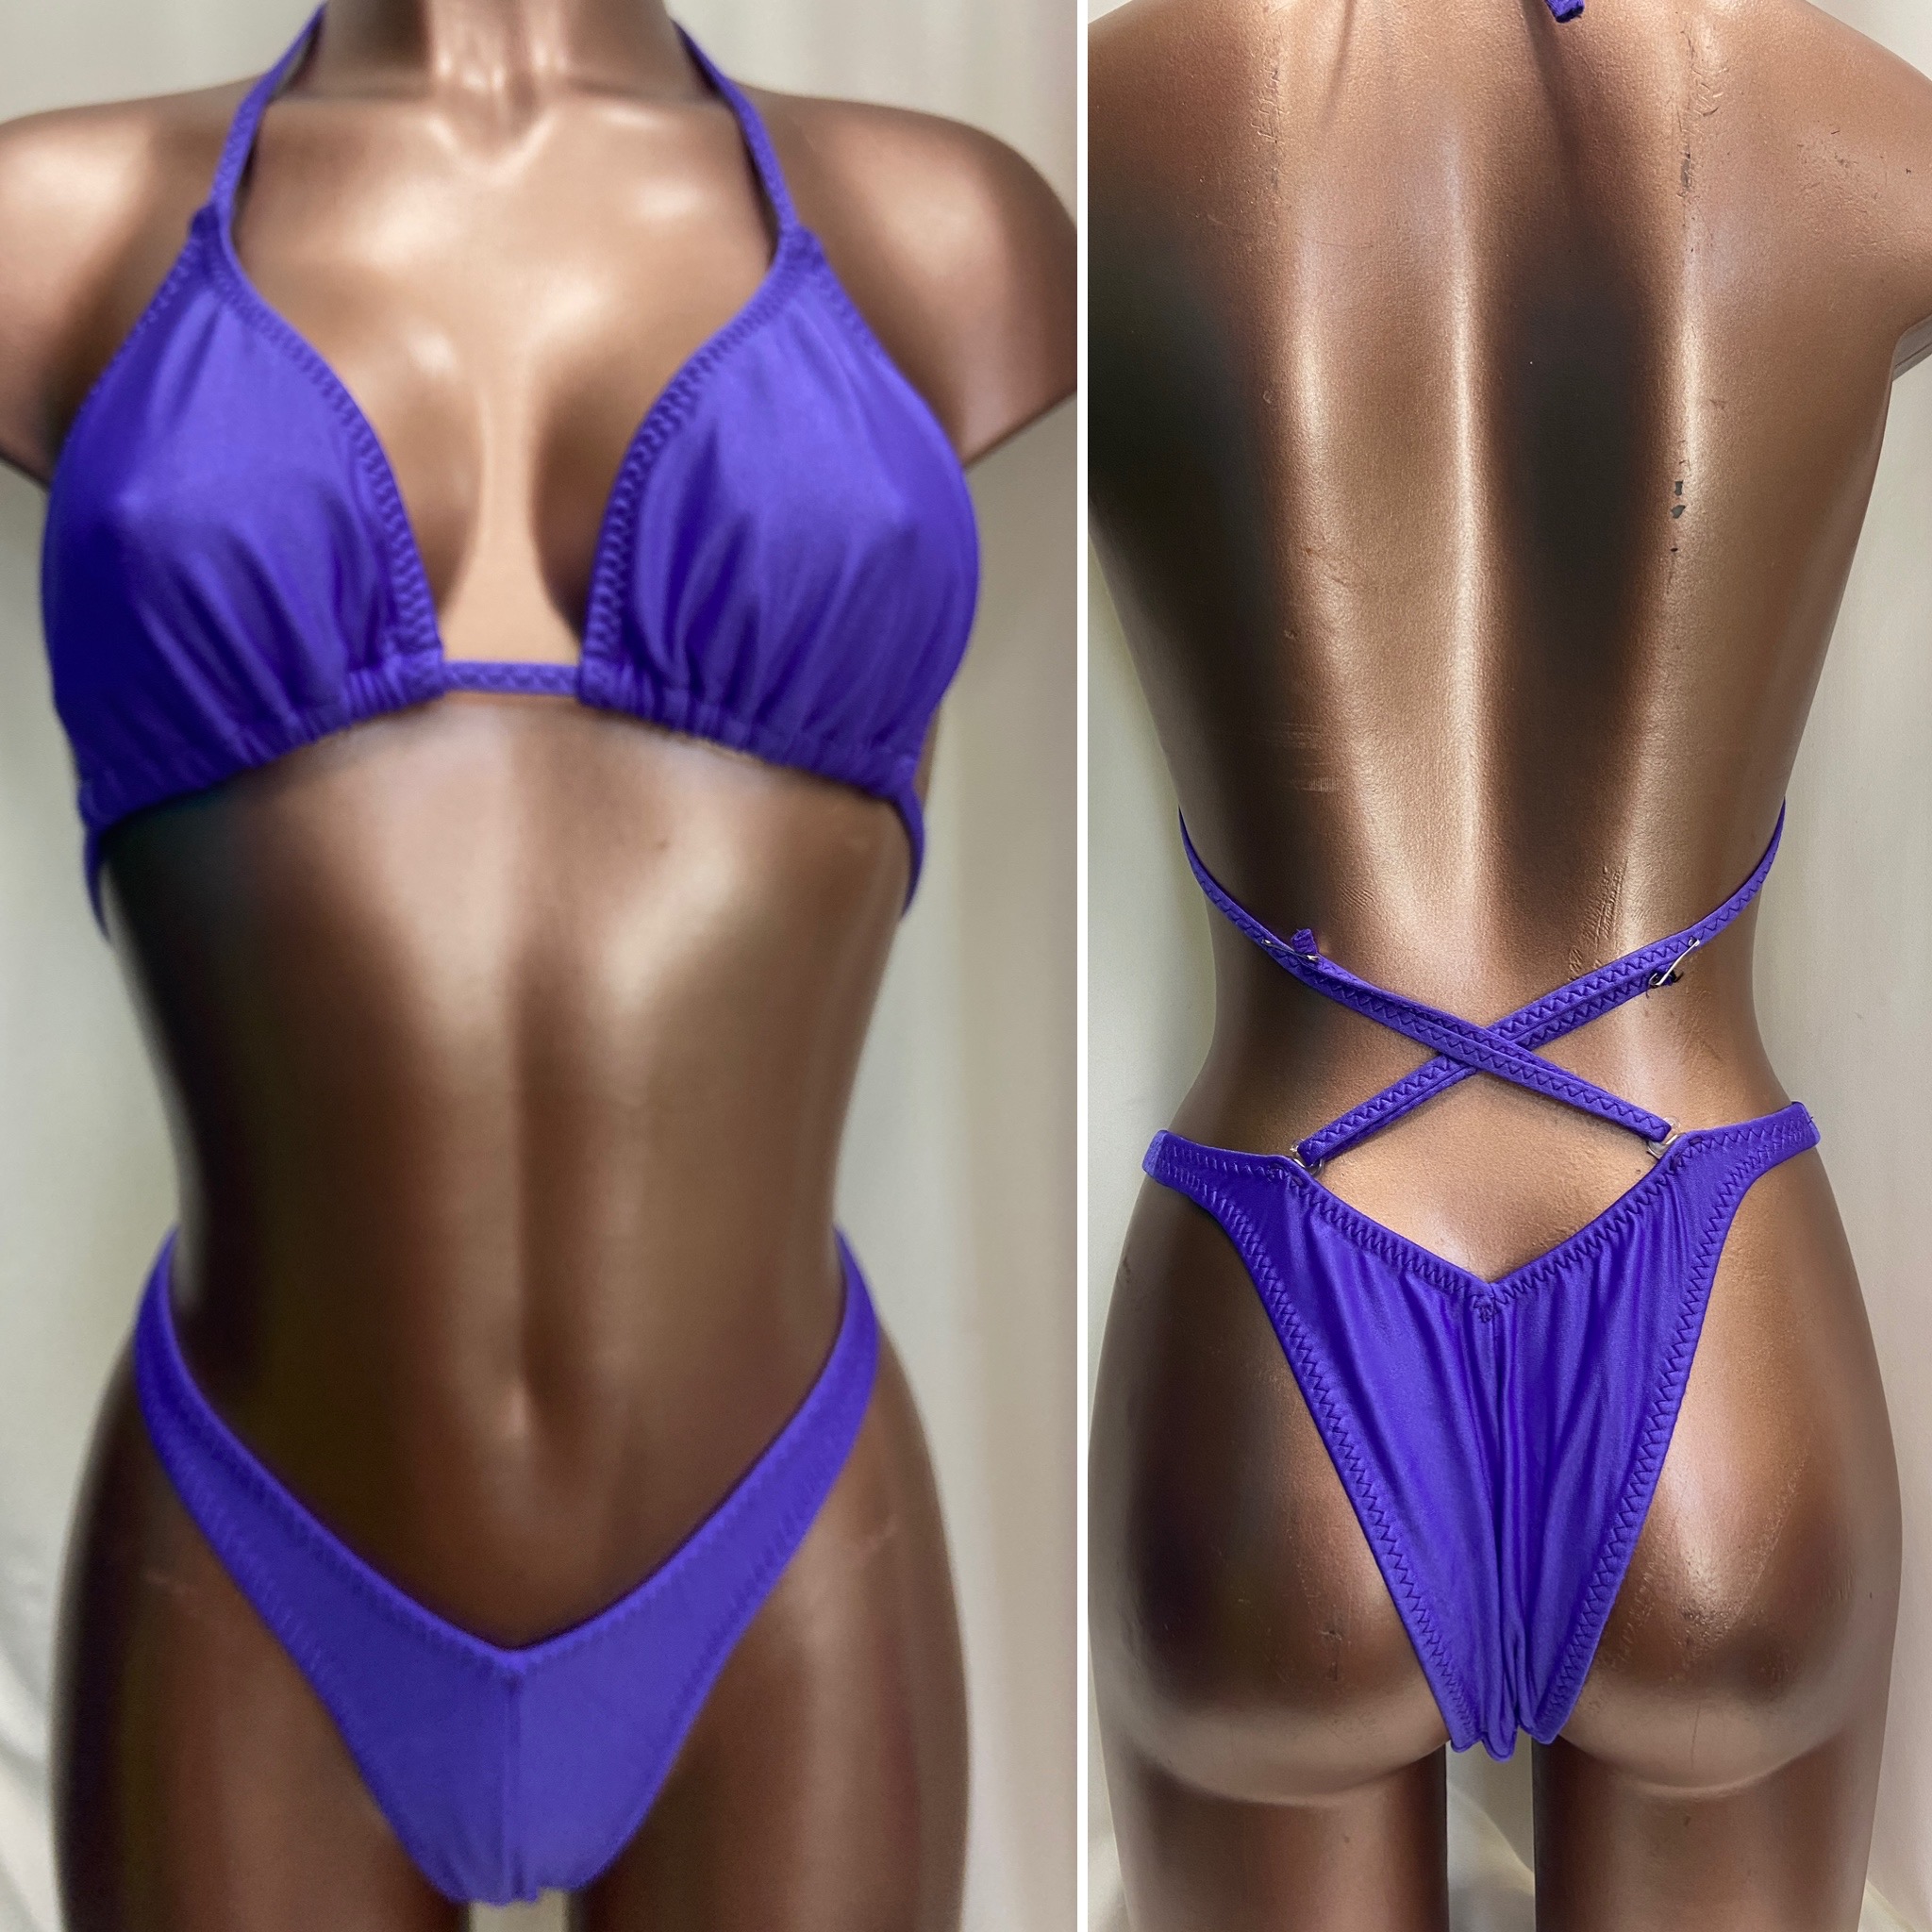 P6005
$85
B+ sliding top 
Tall front , small back
Purple lycra 